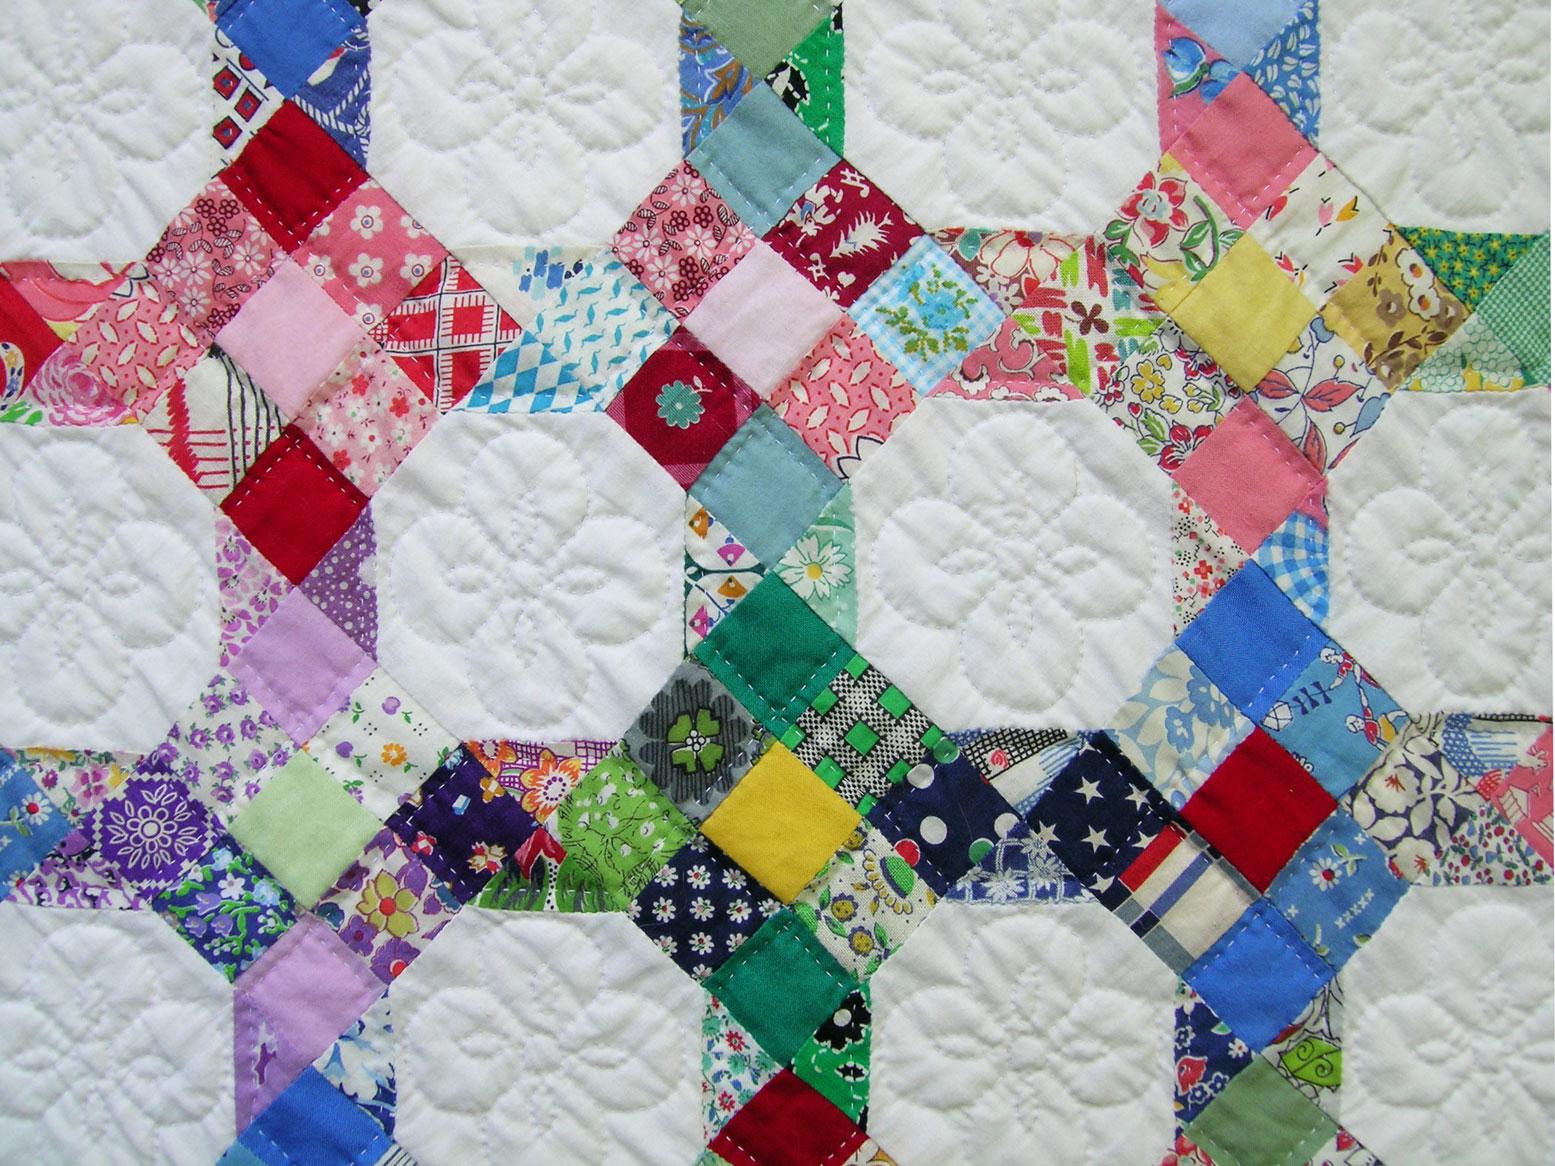 a section of a colorful quilt